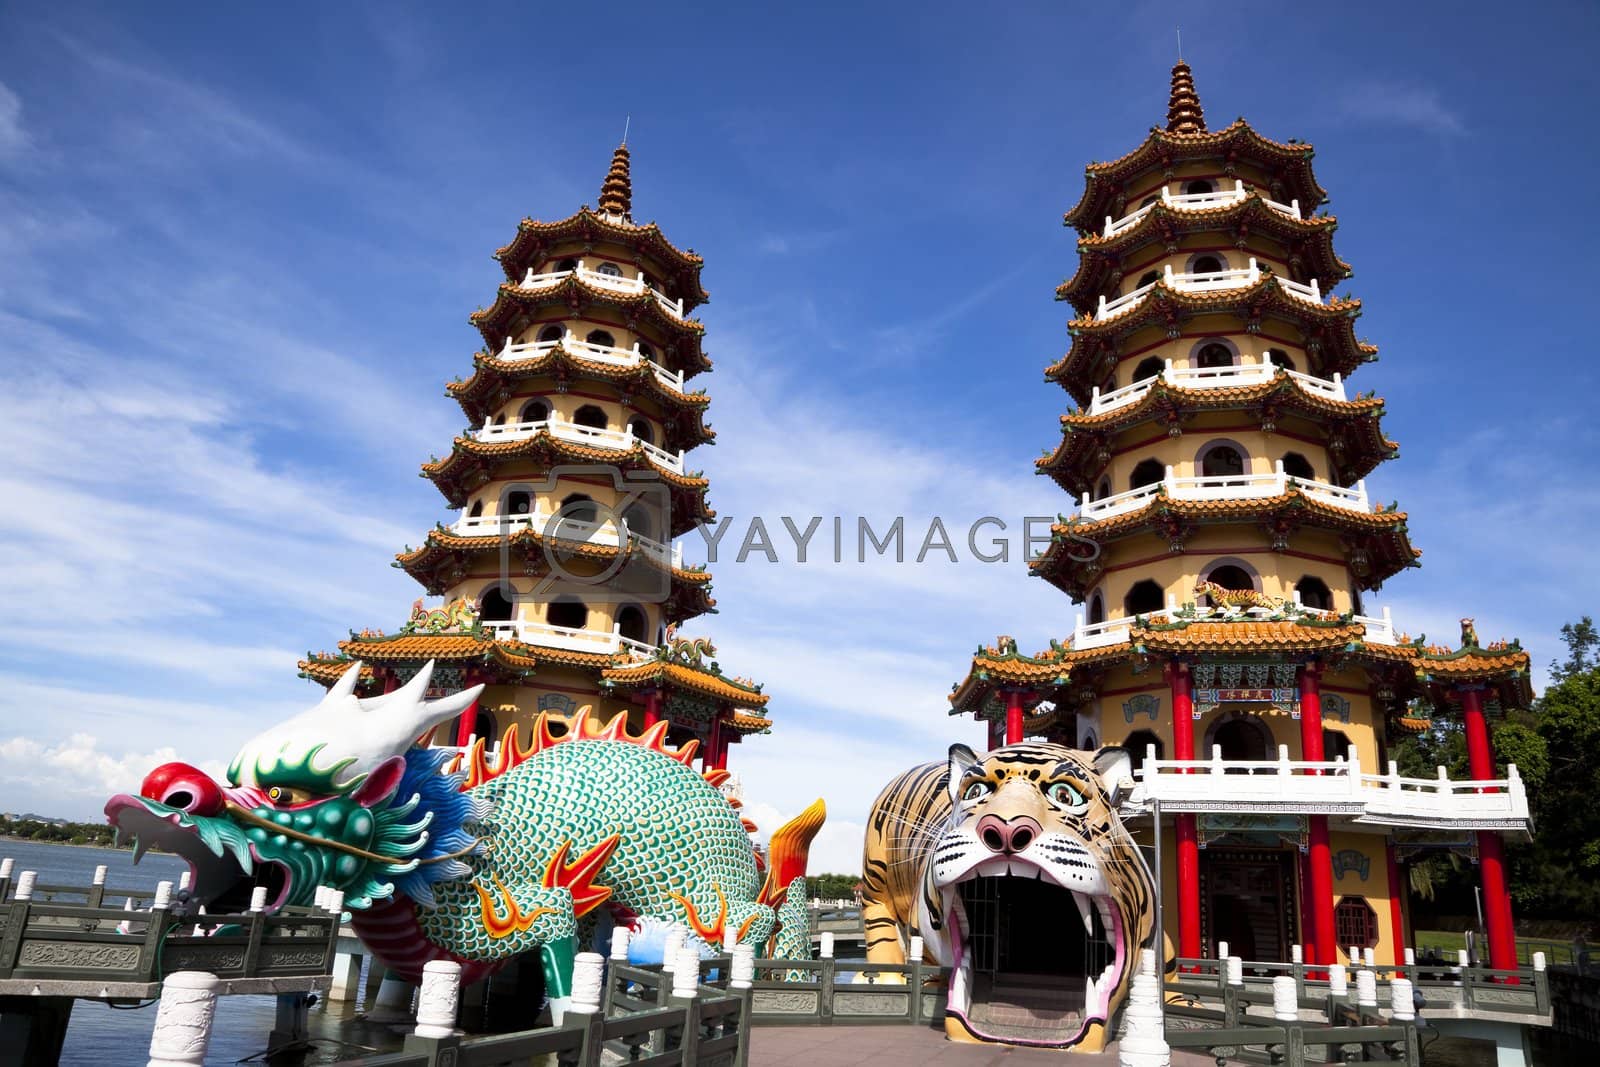 Royalty free image of Famous Tower and dragon and tiger, taiwan by tomwang